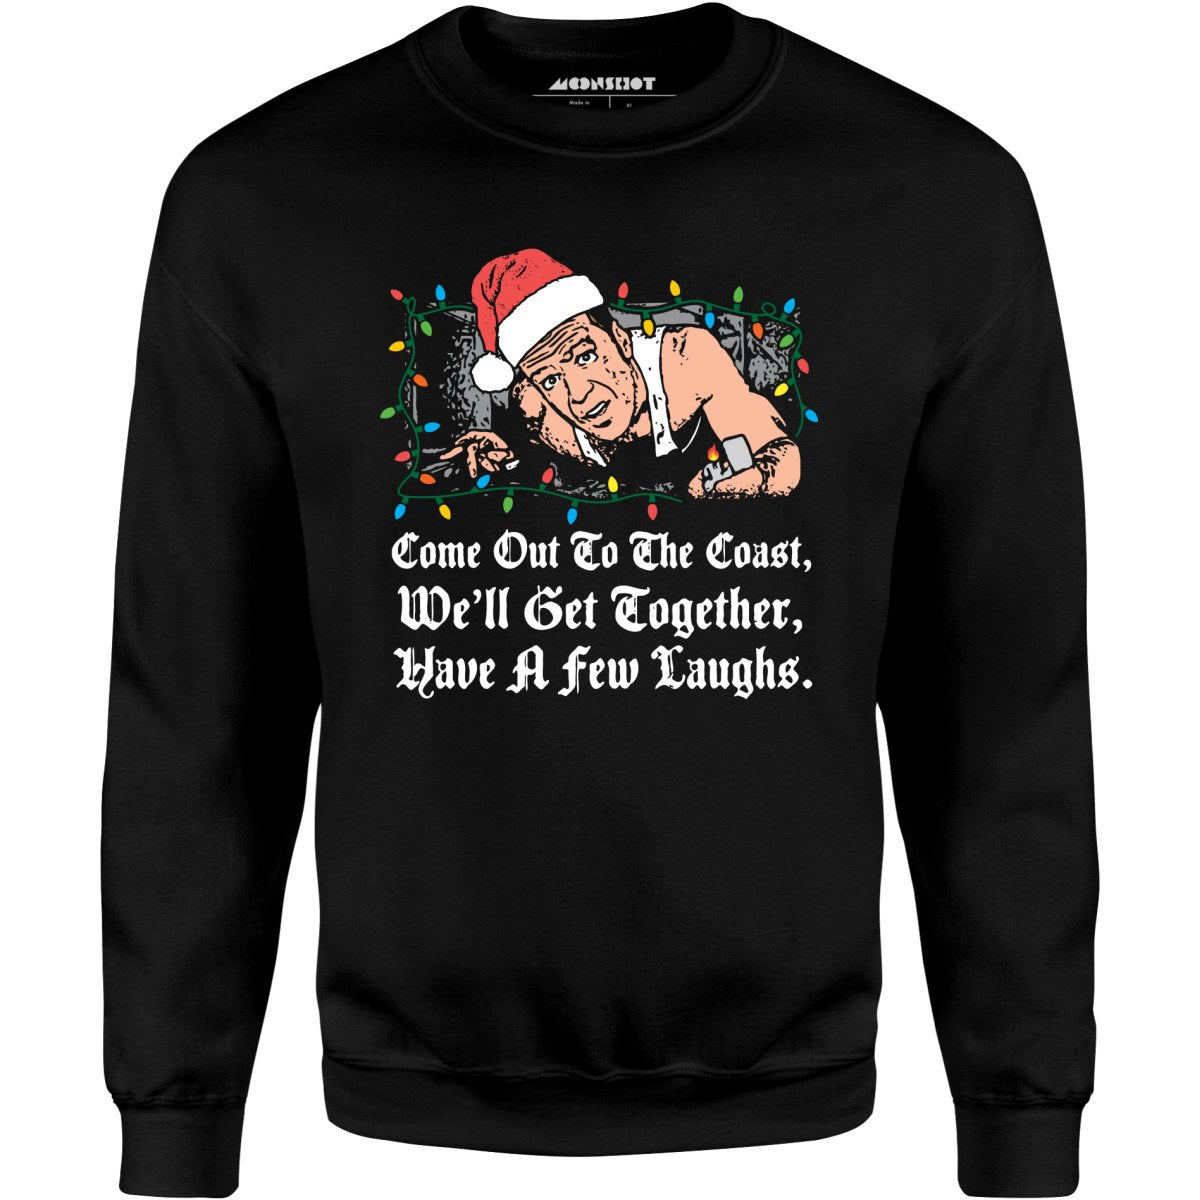 Come Out to The Coast - Unisex Sweatshirt